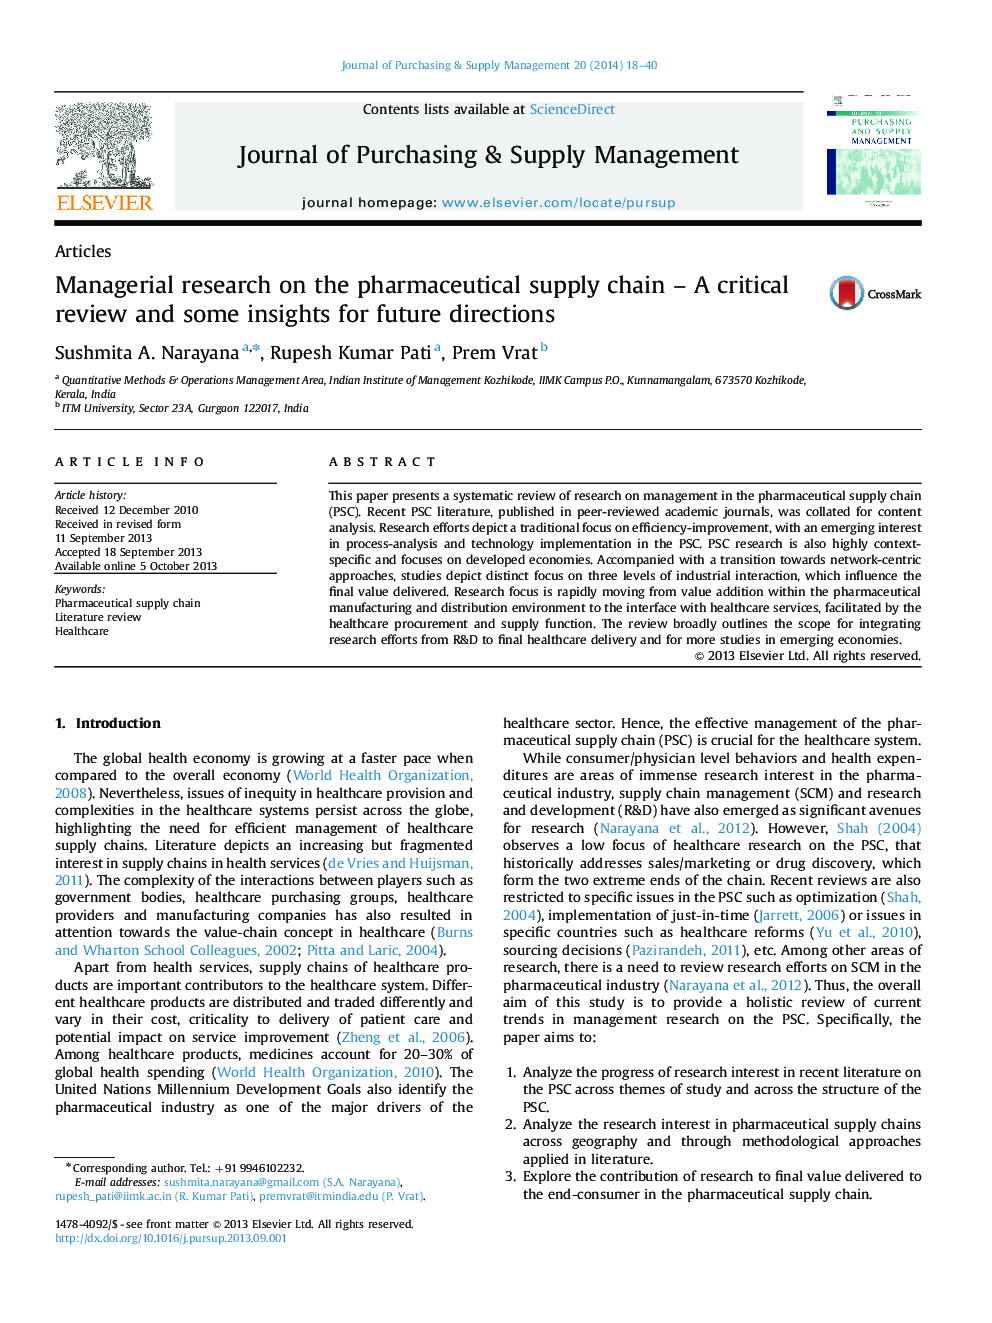 Managerial research on the pharmaceutical supply chain – A critical review and some insights for future directions